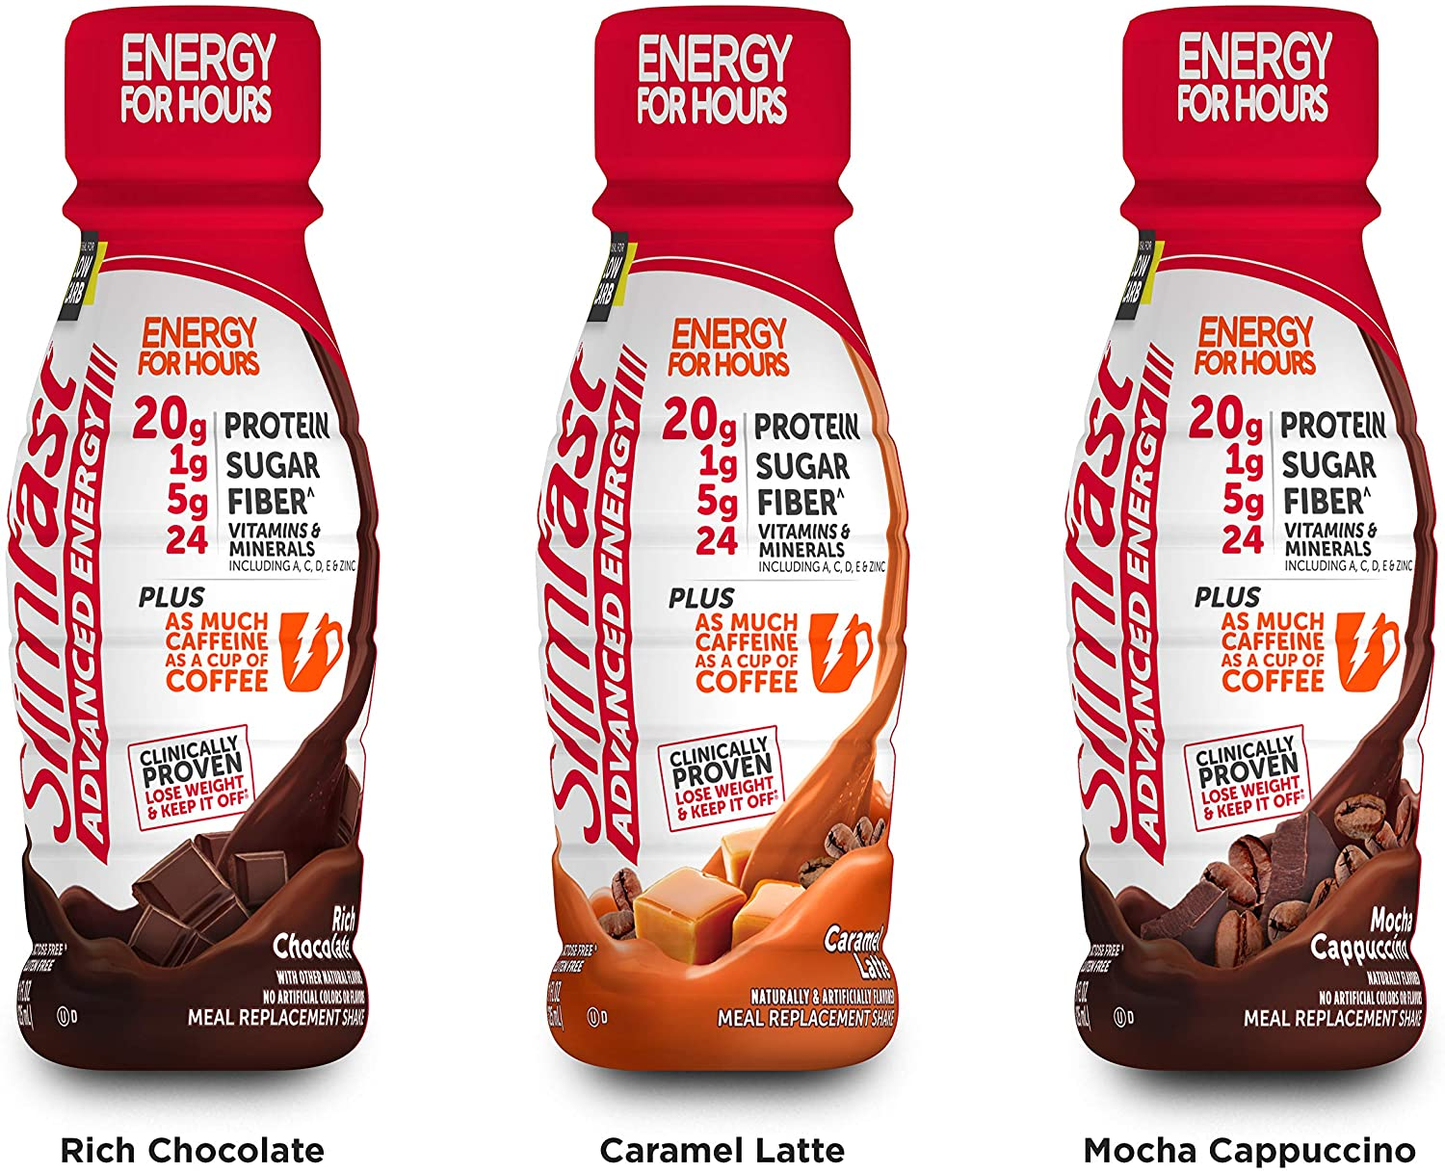 Slimfast Advanced Energy High Protein Meal Replacement Shake, Caramel Latte, 20G of Ready to Drink Protein with Caffeine, 11 Fl. Oz Bottle, 4 Count (Pack of 3)